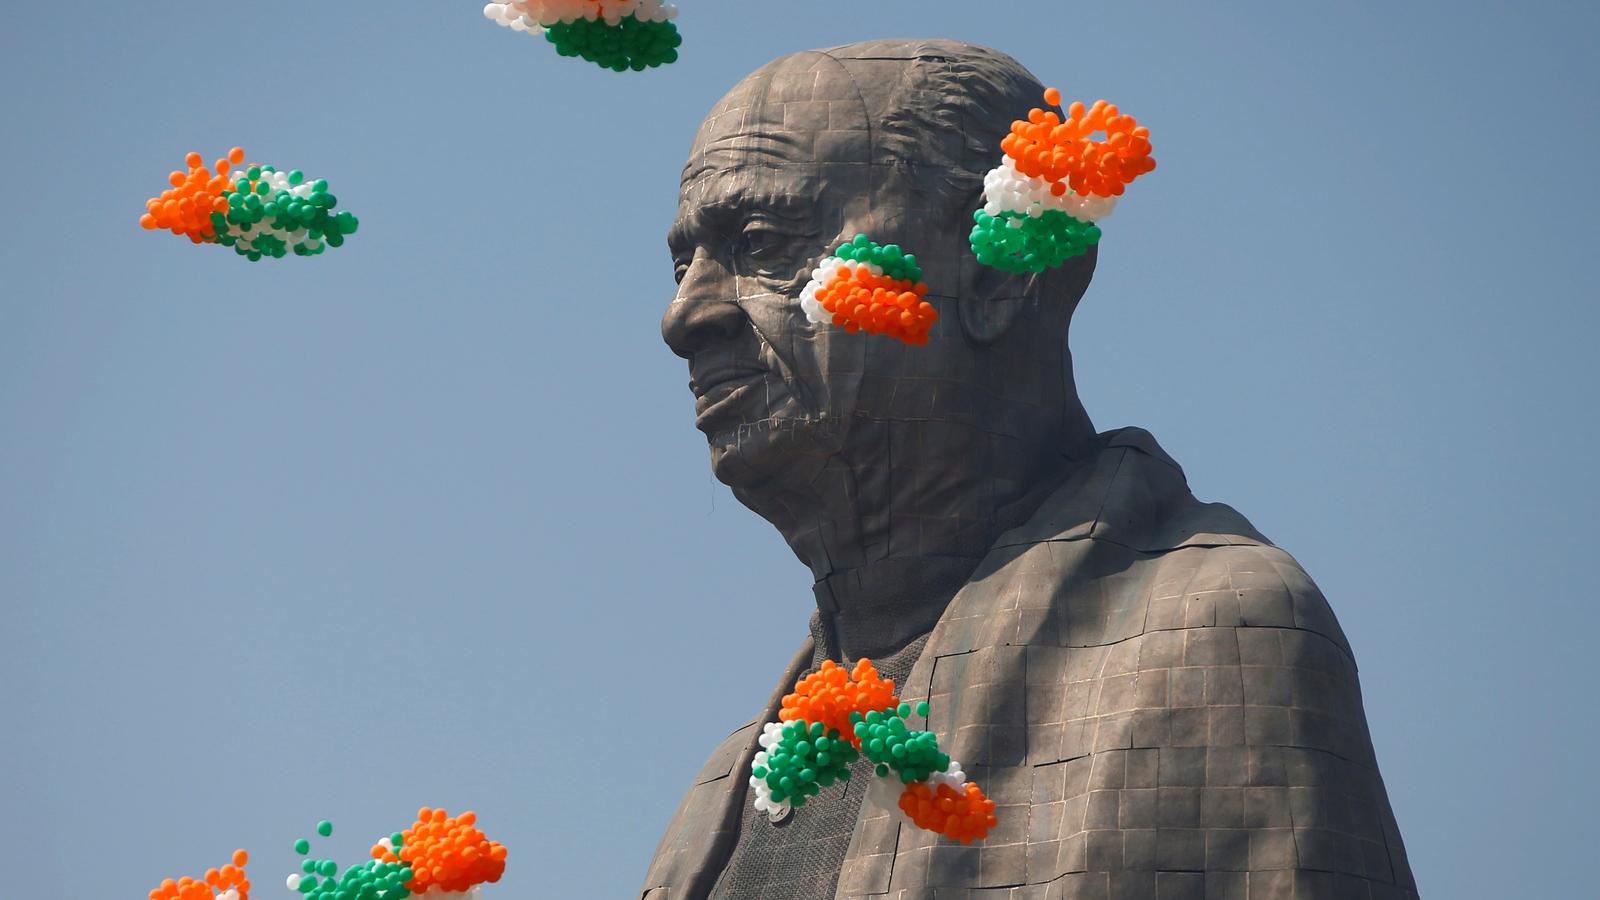 Indian tri-colored balloons fly around a statue head of Indian founding father Sardar Vallabhbhai Patel